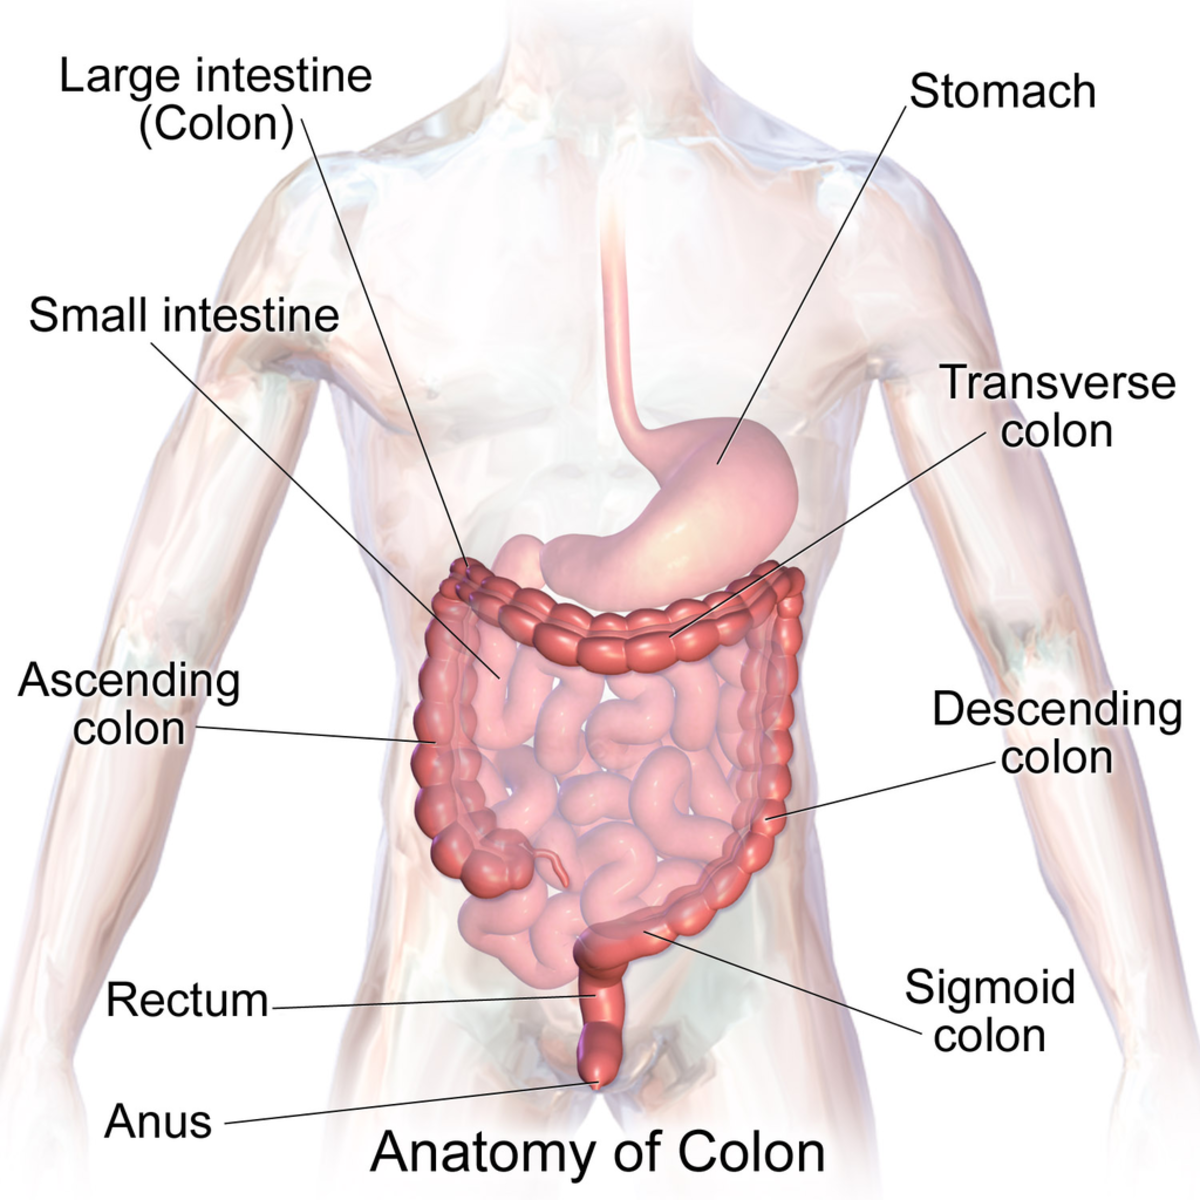 Anatomy of the large intestine (sometimes known as the colon)